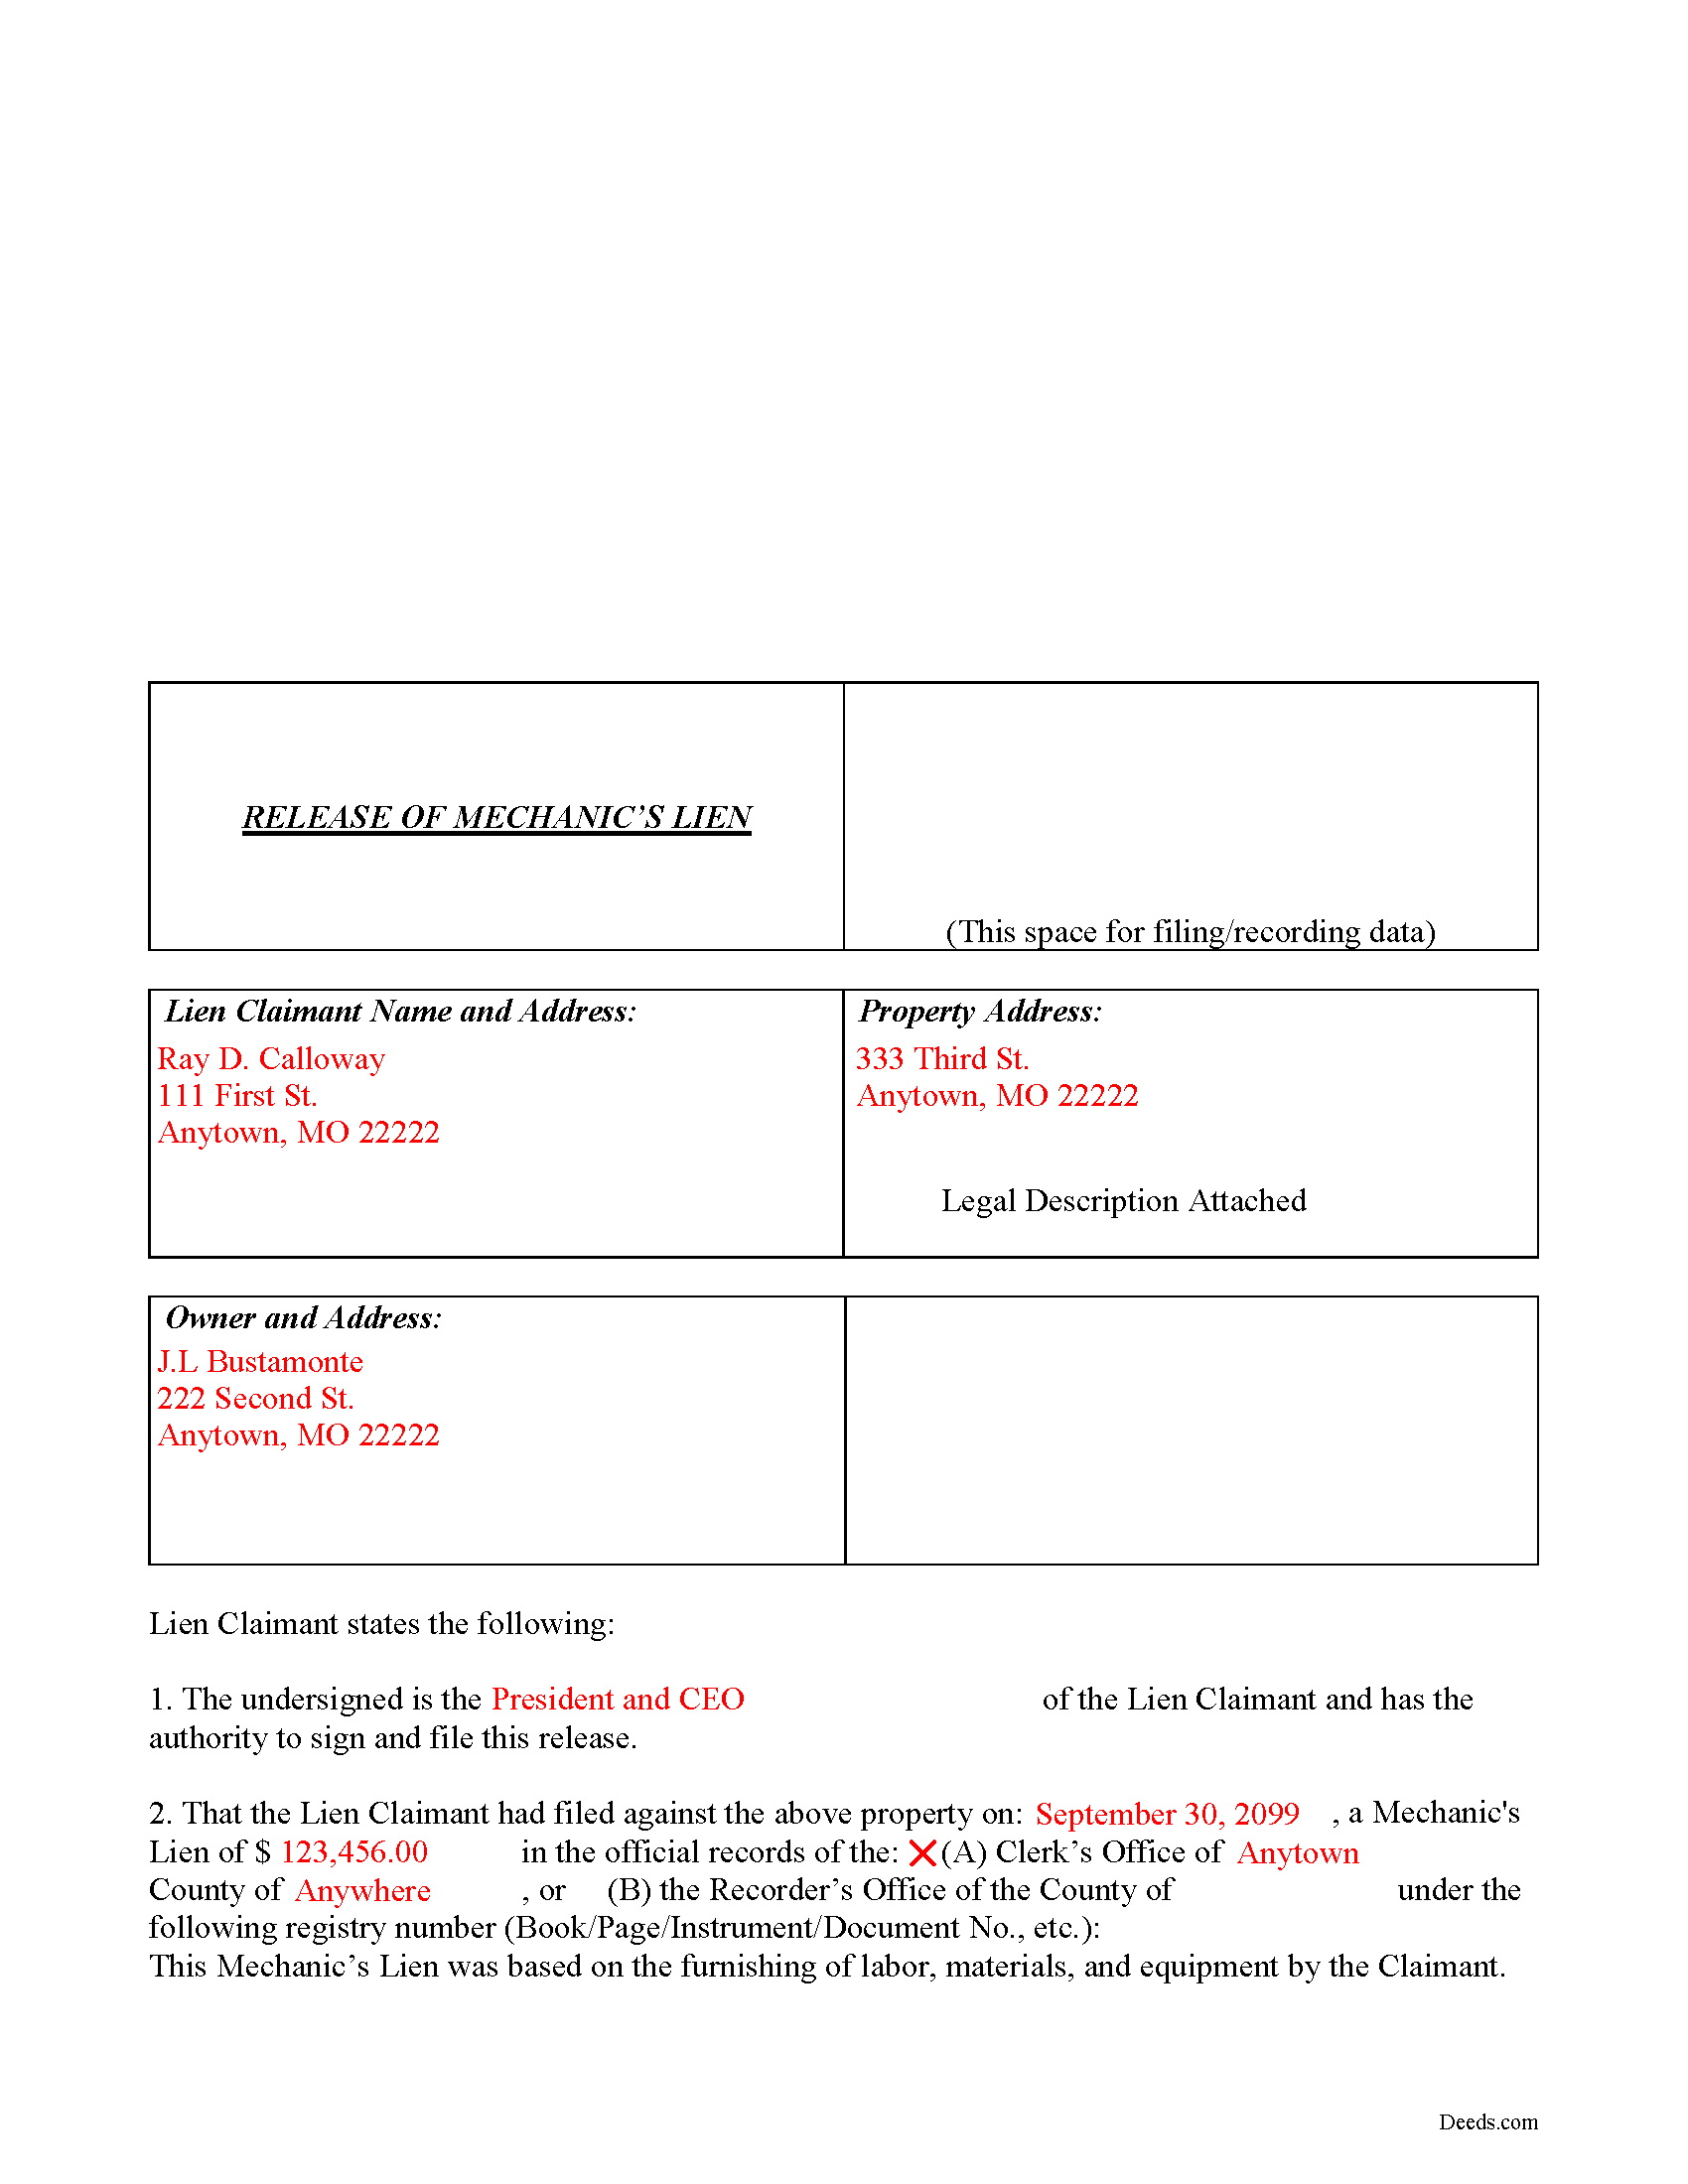 Completed Example of the Lien Release Document